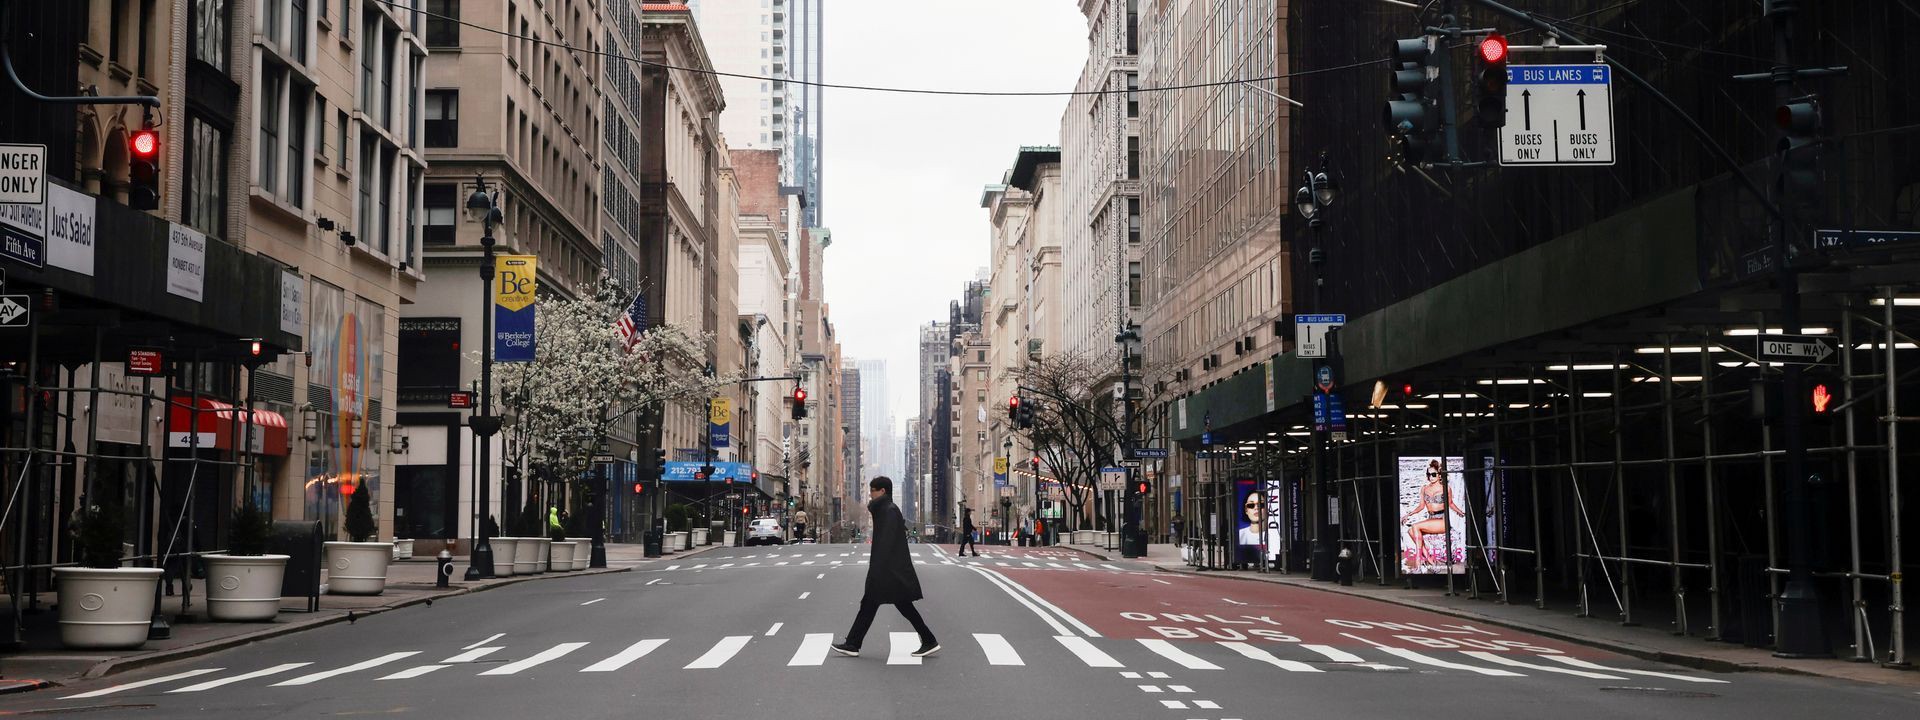 A man crosses a nearly empty 5th Avenue in midtown Manhattan during the outbreak of the coronavirus disease (COVID-19) in New York City, March 25, 2020. (Source: Medium / REUTERS/Mike Segar)